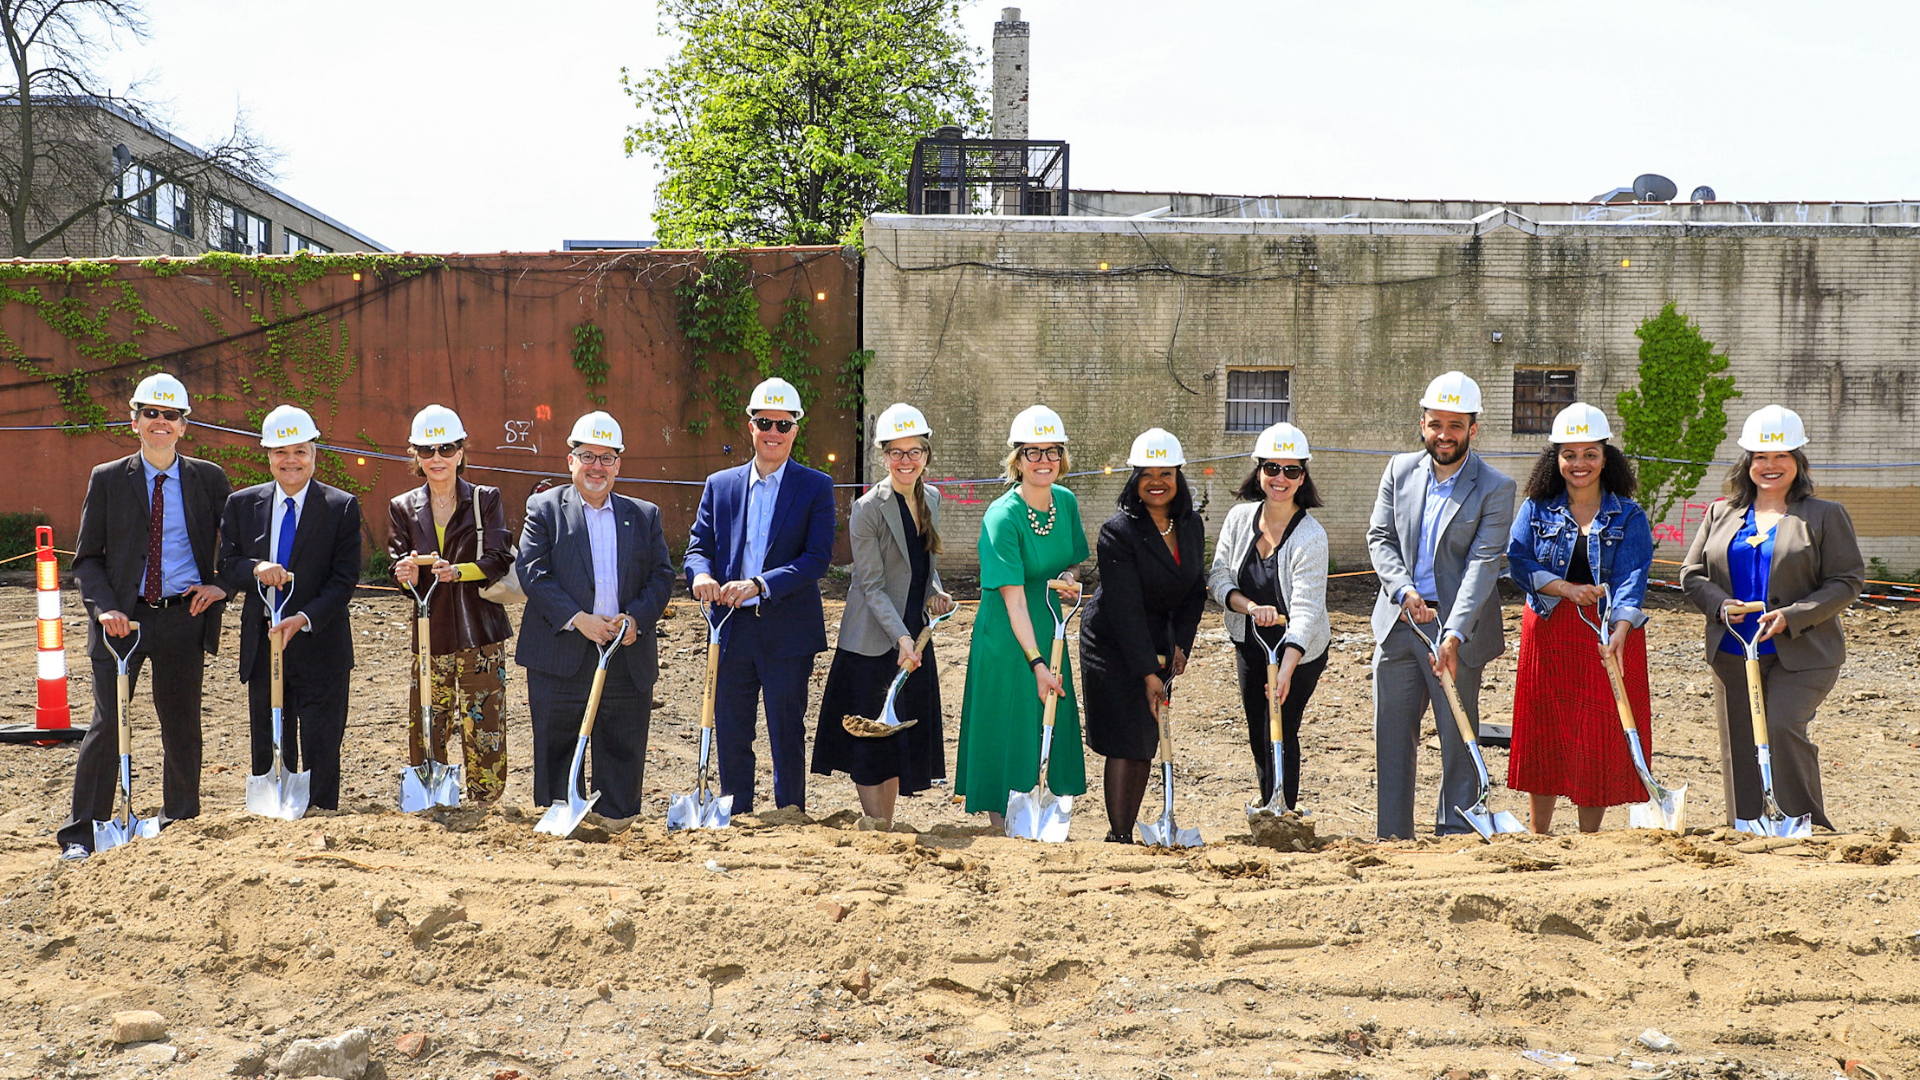 S:US, Osborne and L+M Celebrate Groundbreaking for Landmark Affordable and Supportive Housing Expansion in Brooklyn